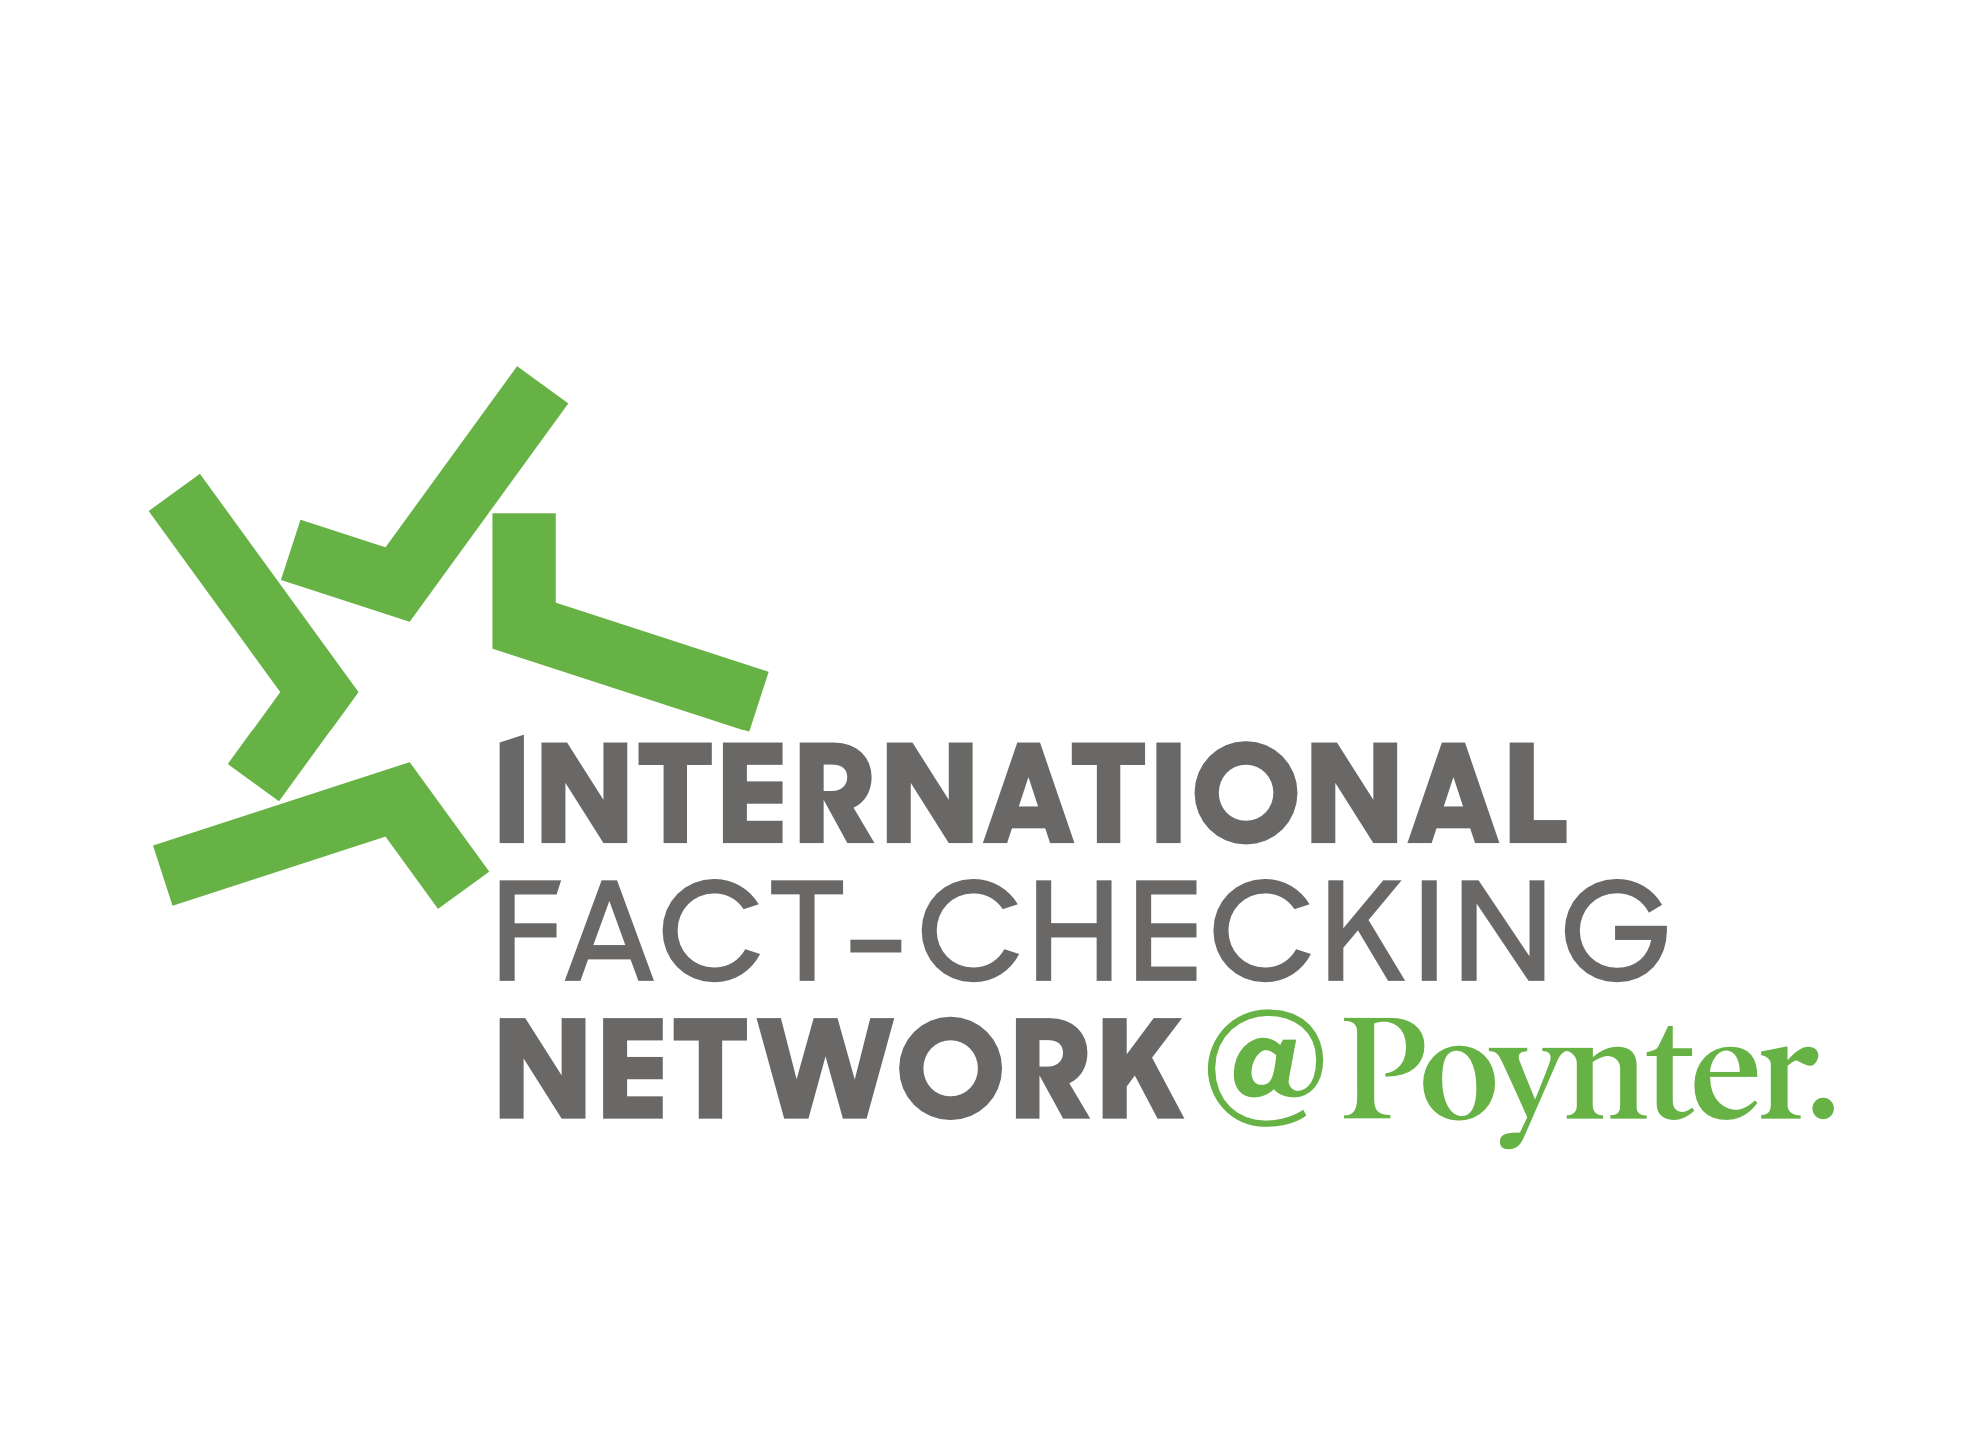 The International Fact-Checking Network deplores attack on journalist from Faktograf of Croatia